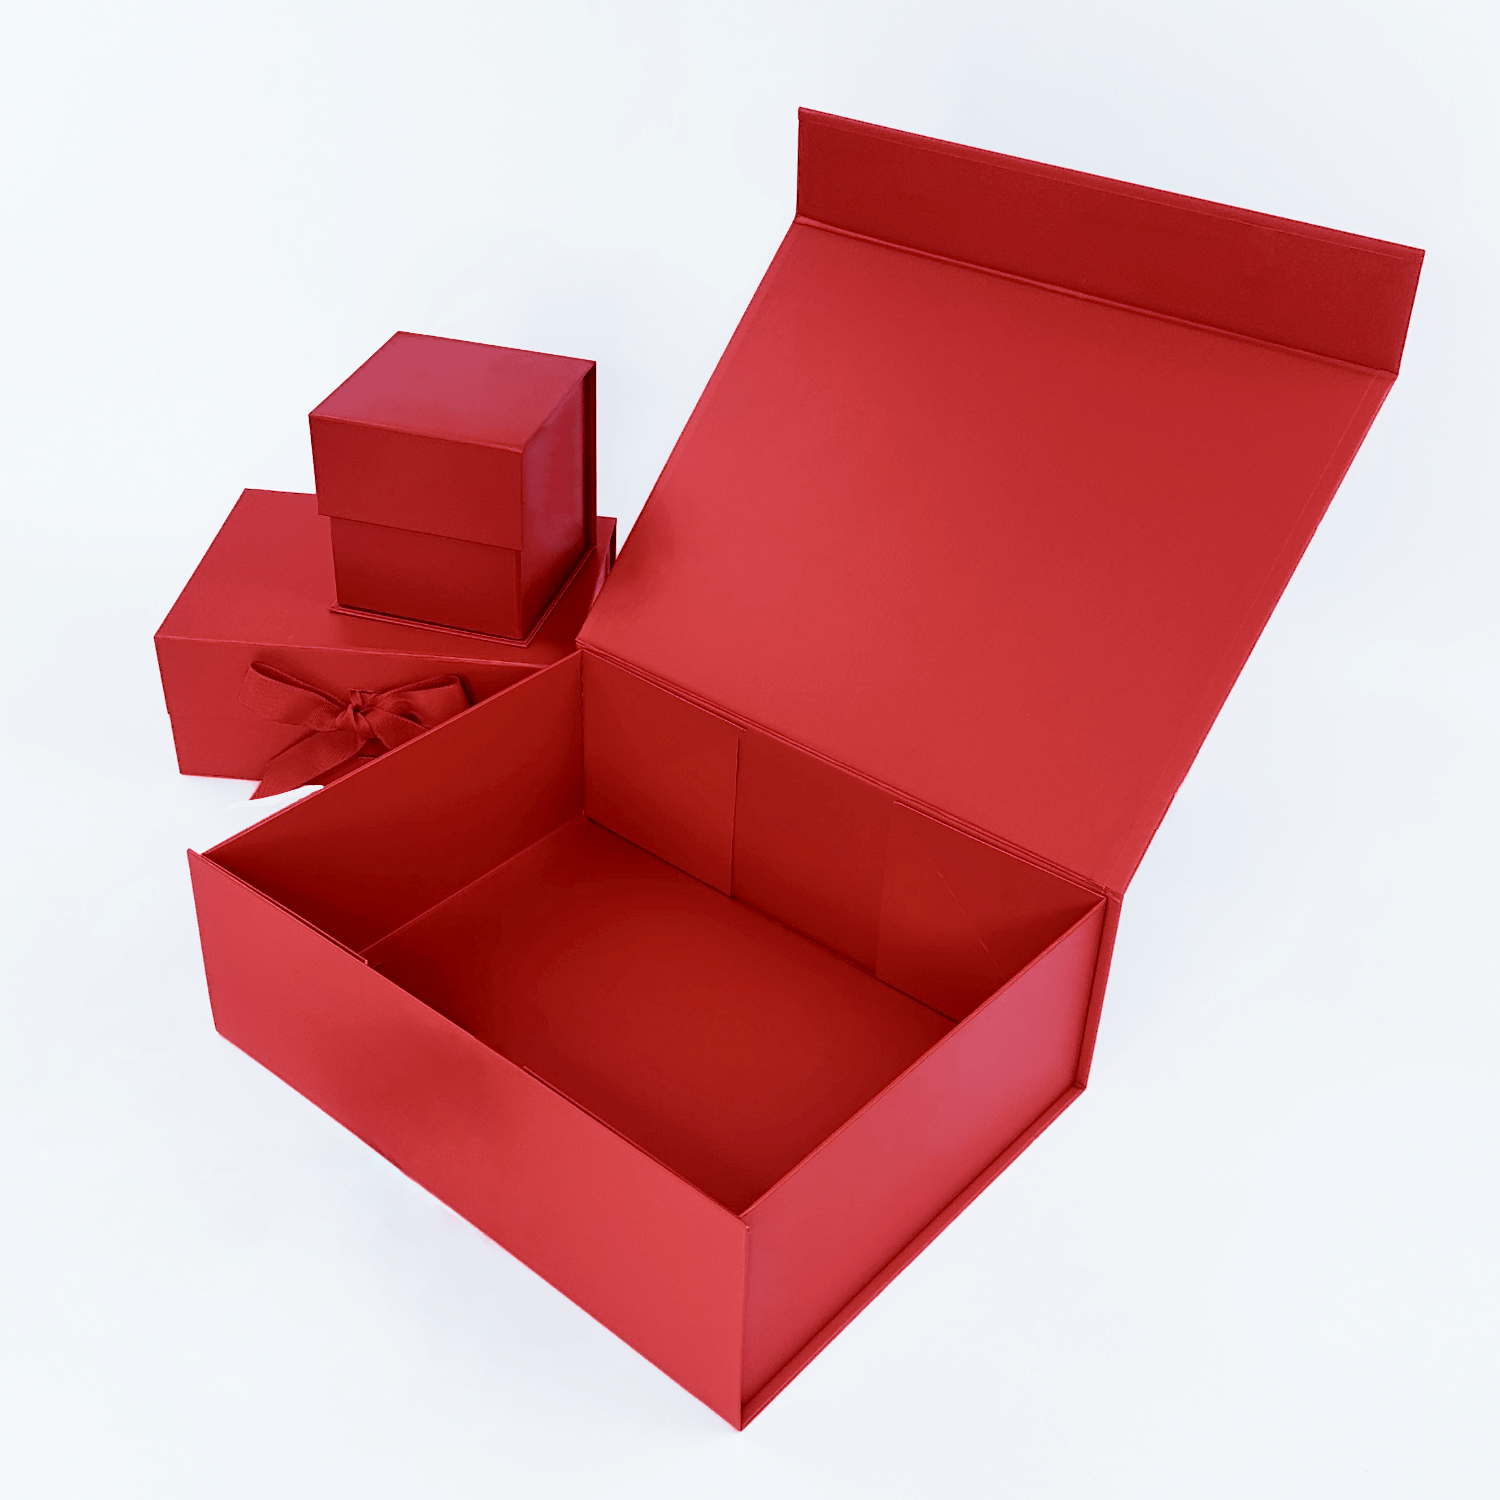 red open gift box